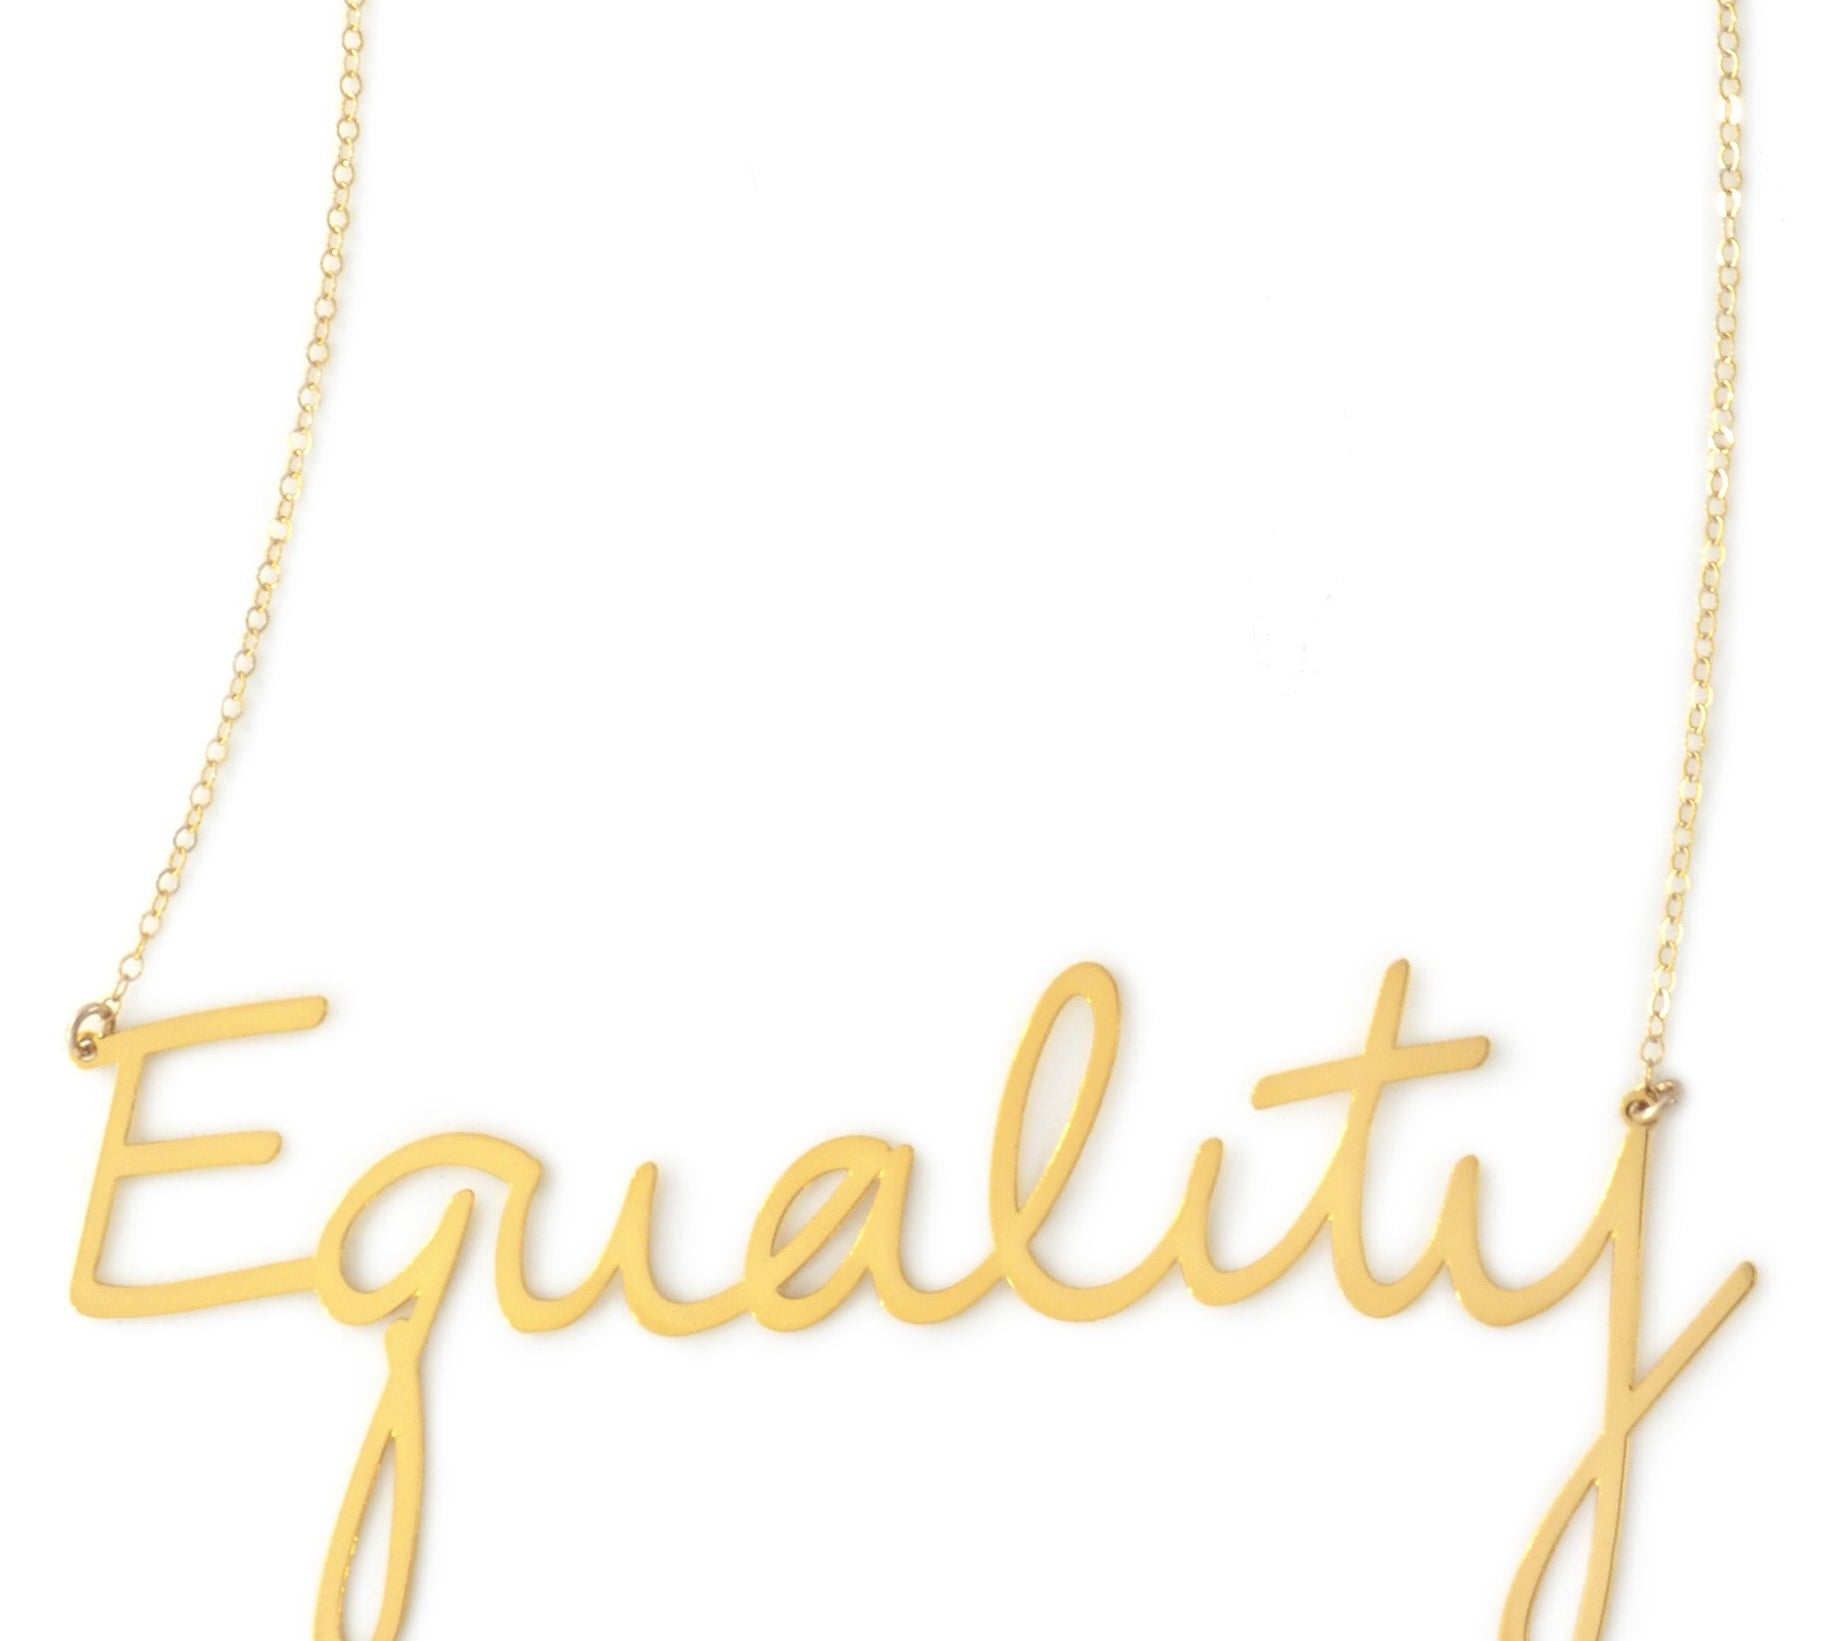 Equality Necklace - High Quality, Affordable, Hand Written, Empowering, Self Love, Mantra Word Necklace - Available in Gold and Silver - Small and Large Sizes - Made in USA - Brevity Jewelry